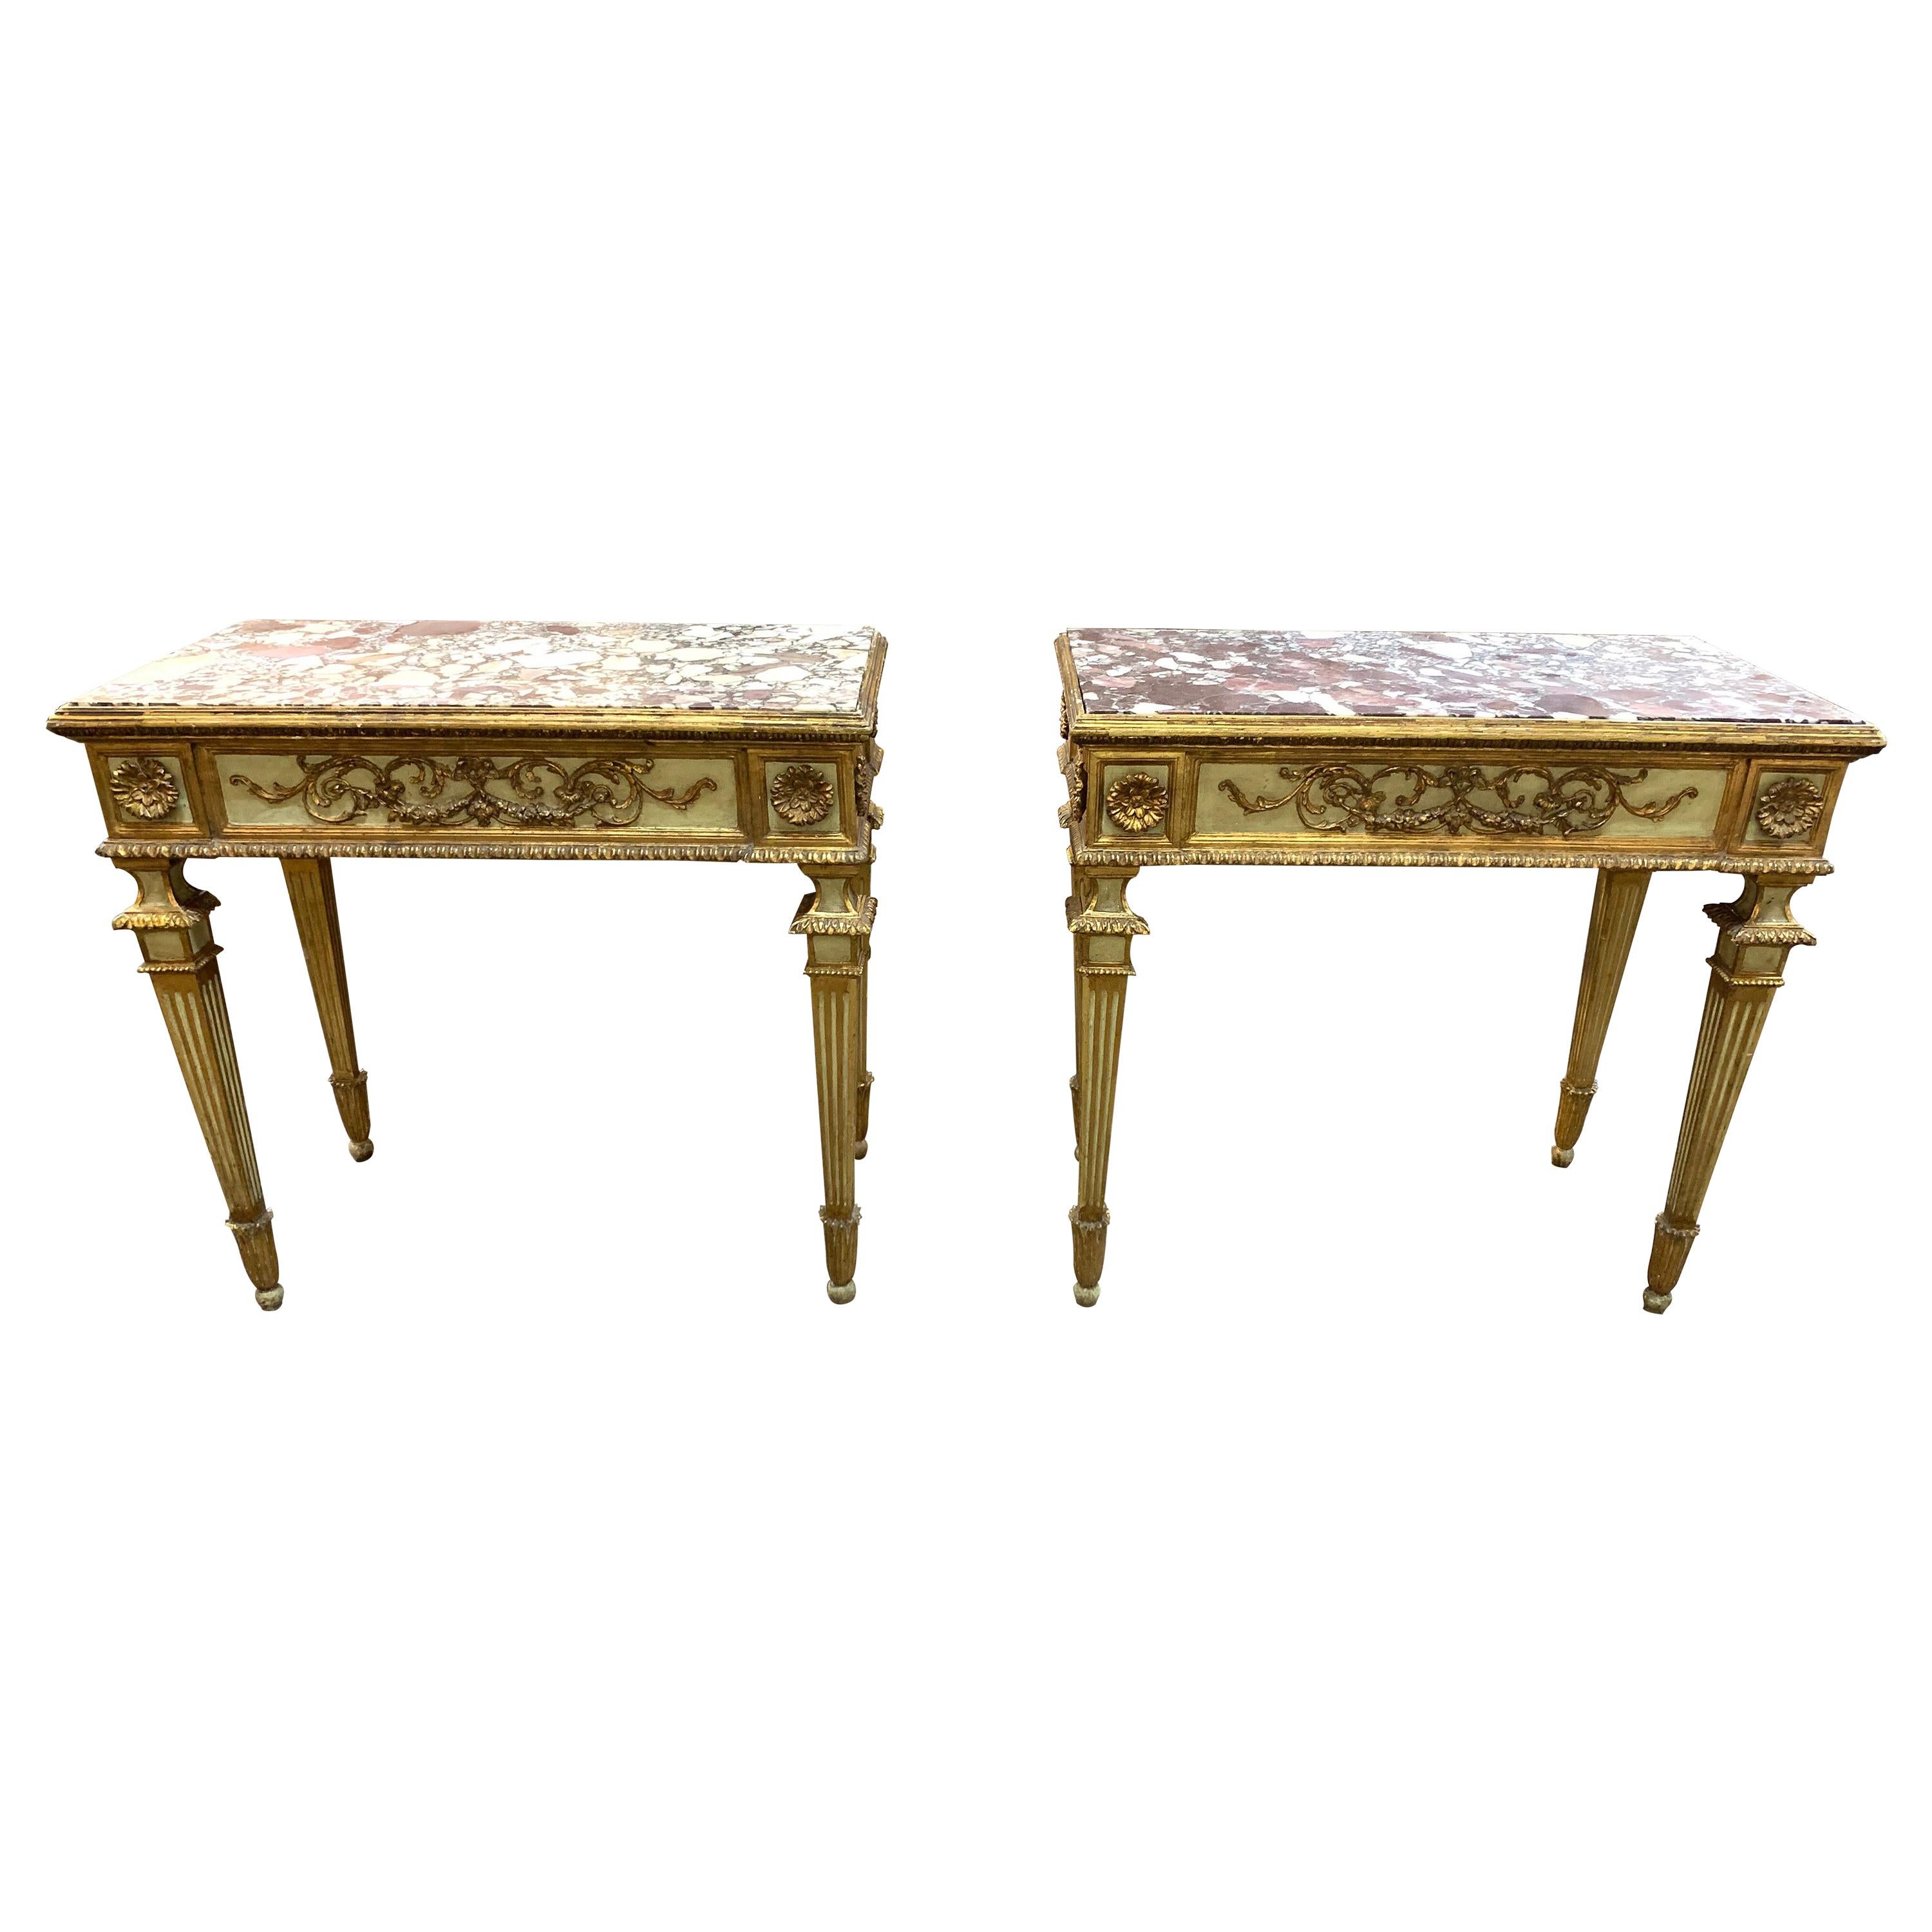 Pair of 19th Century Italian Neoclassical Carved and Painted Consoles